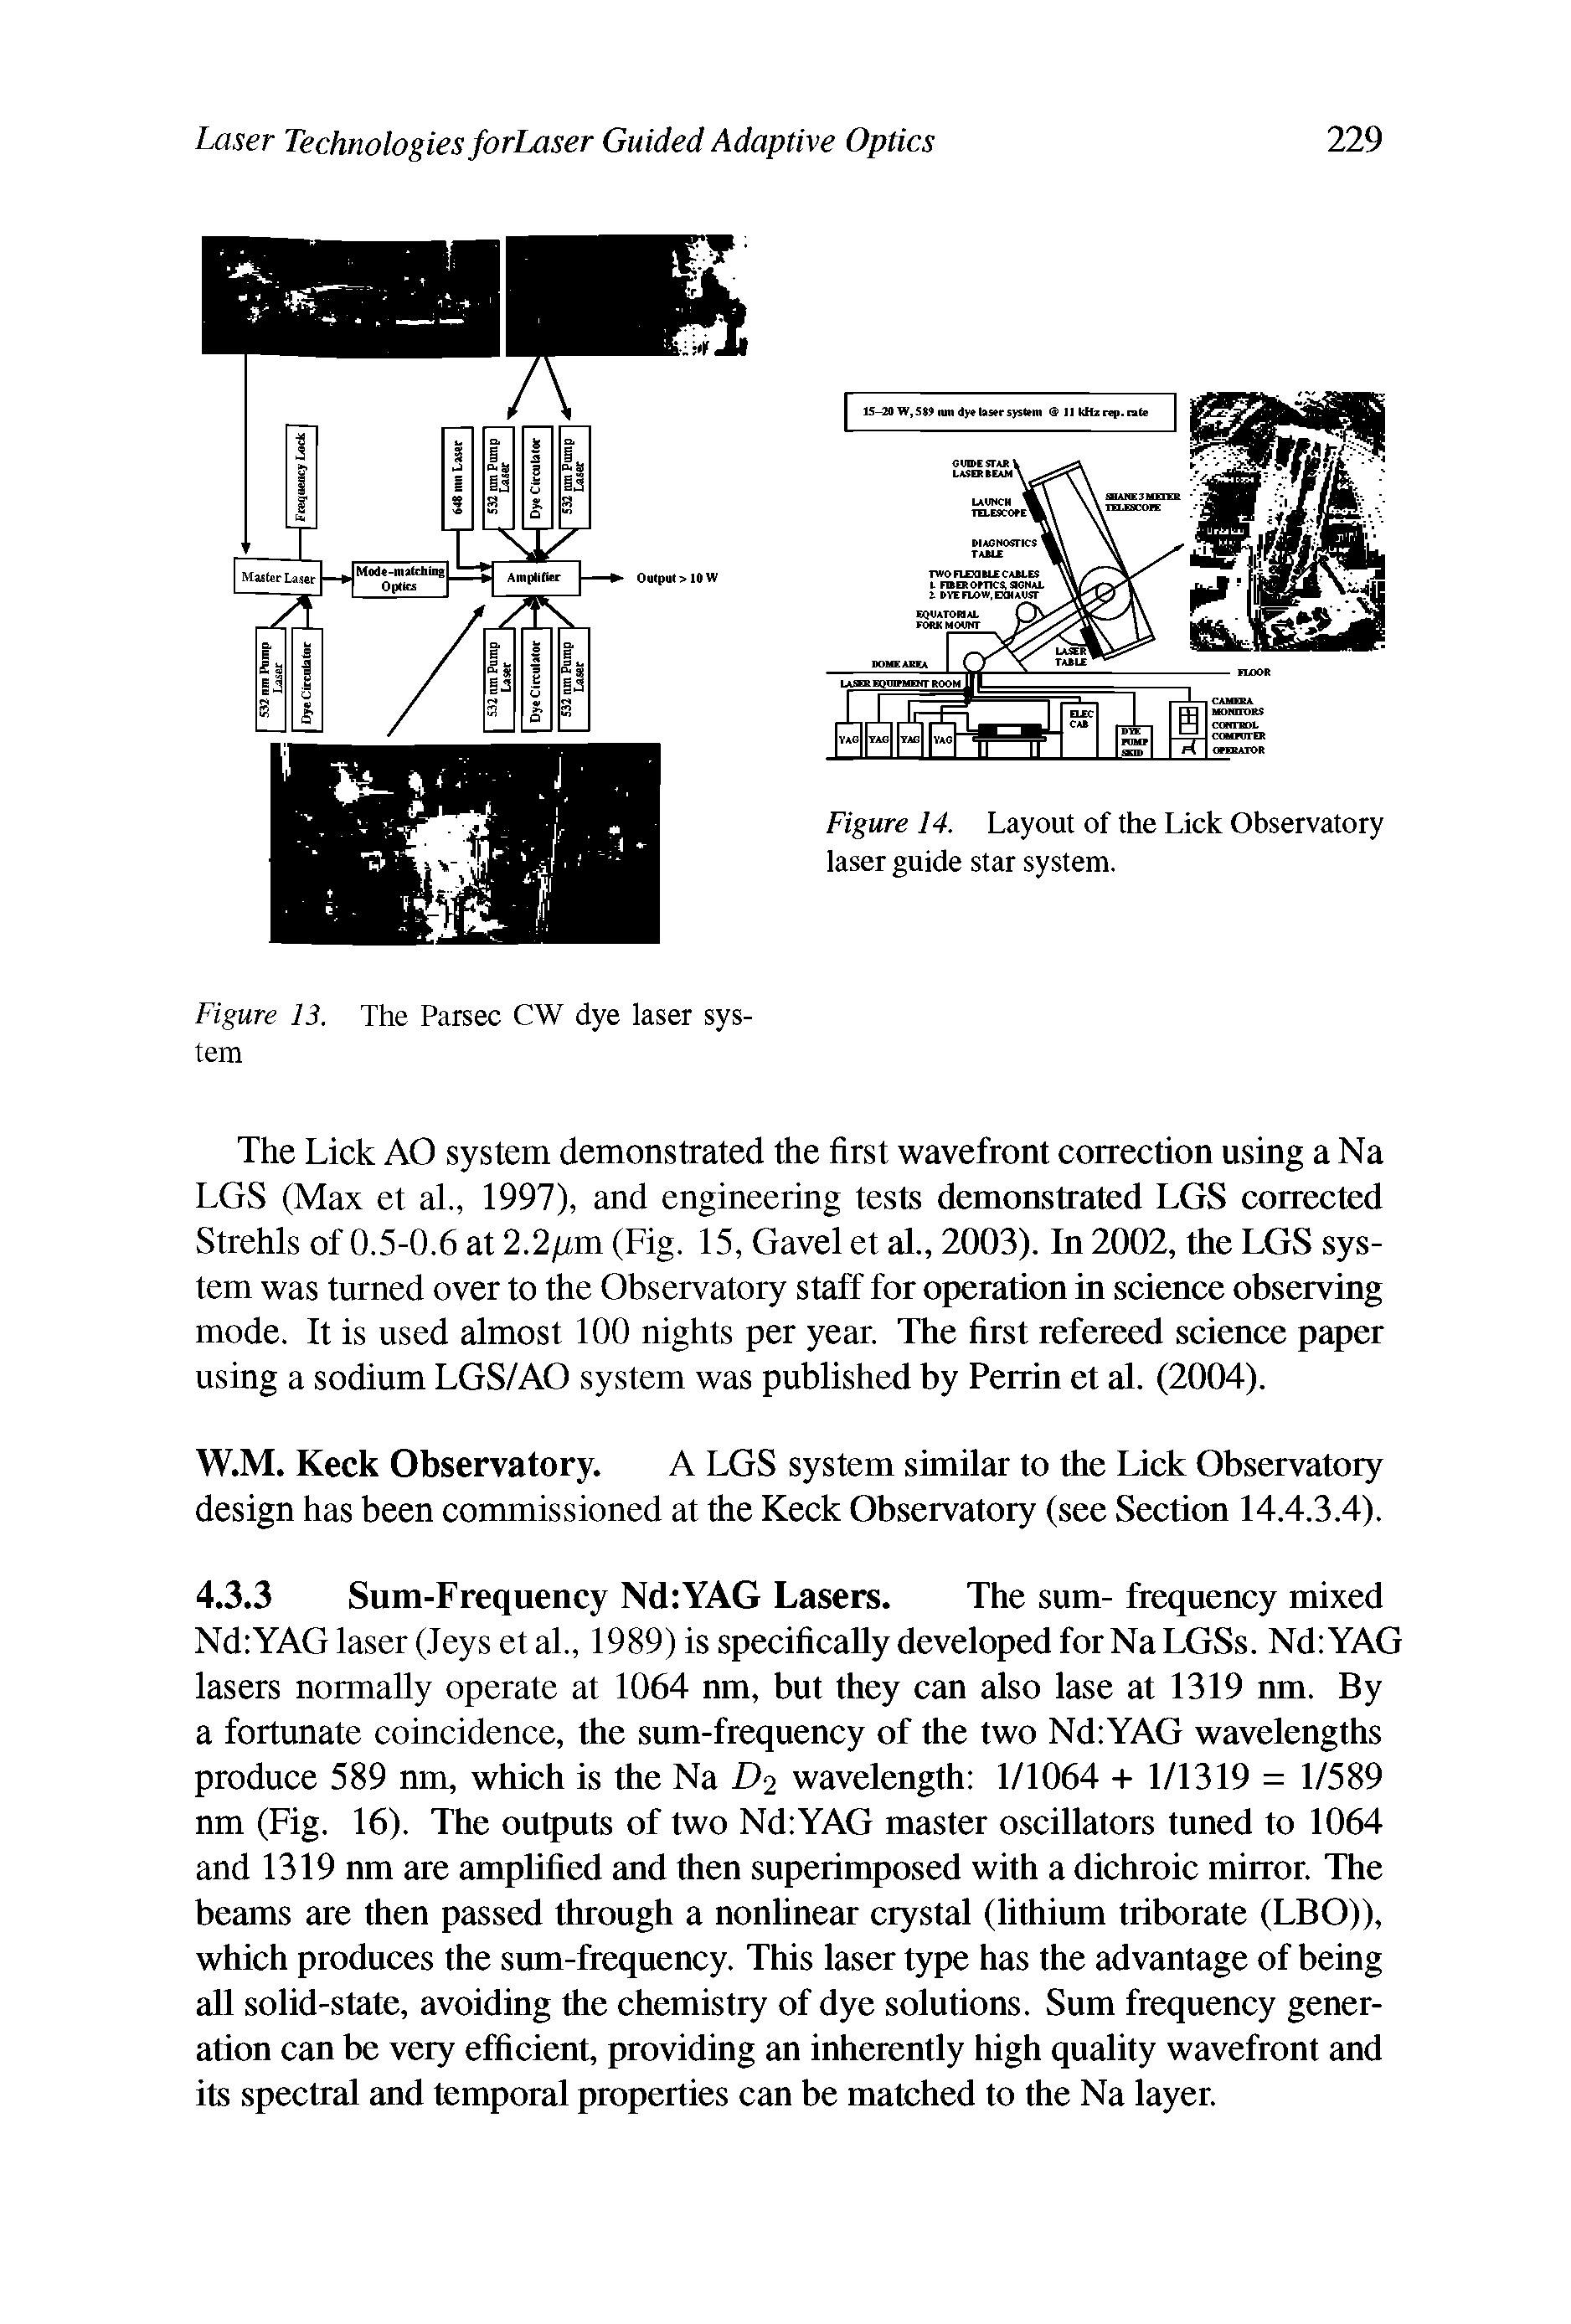 Figure 14. Layout of the Lick Observatory laser guide star system.